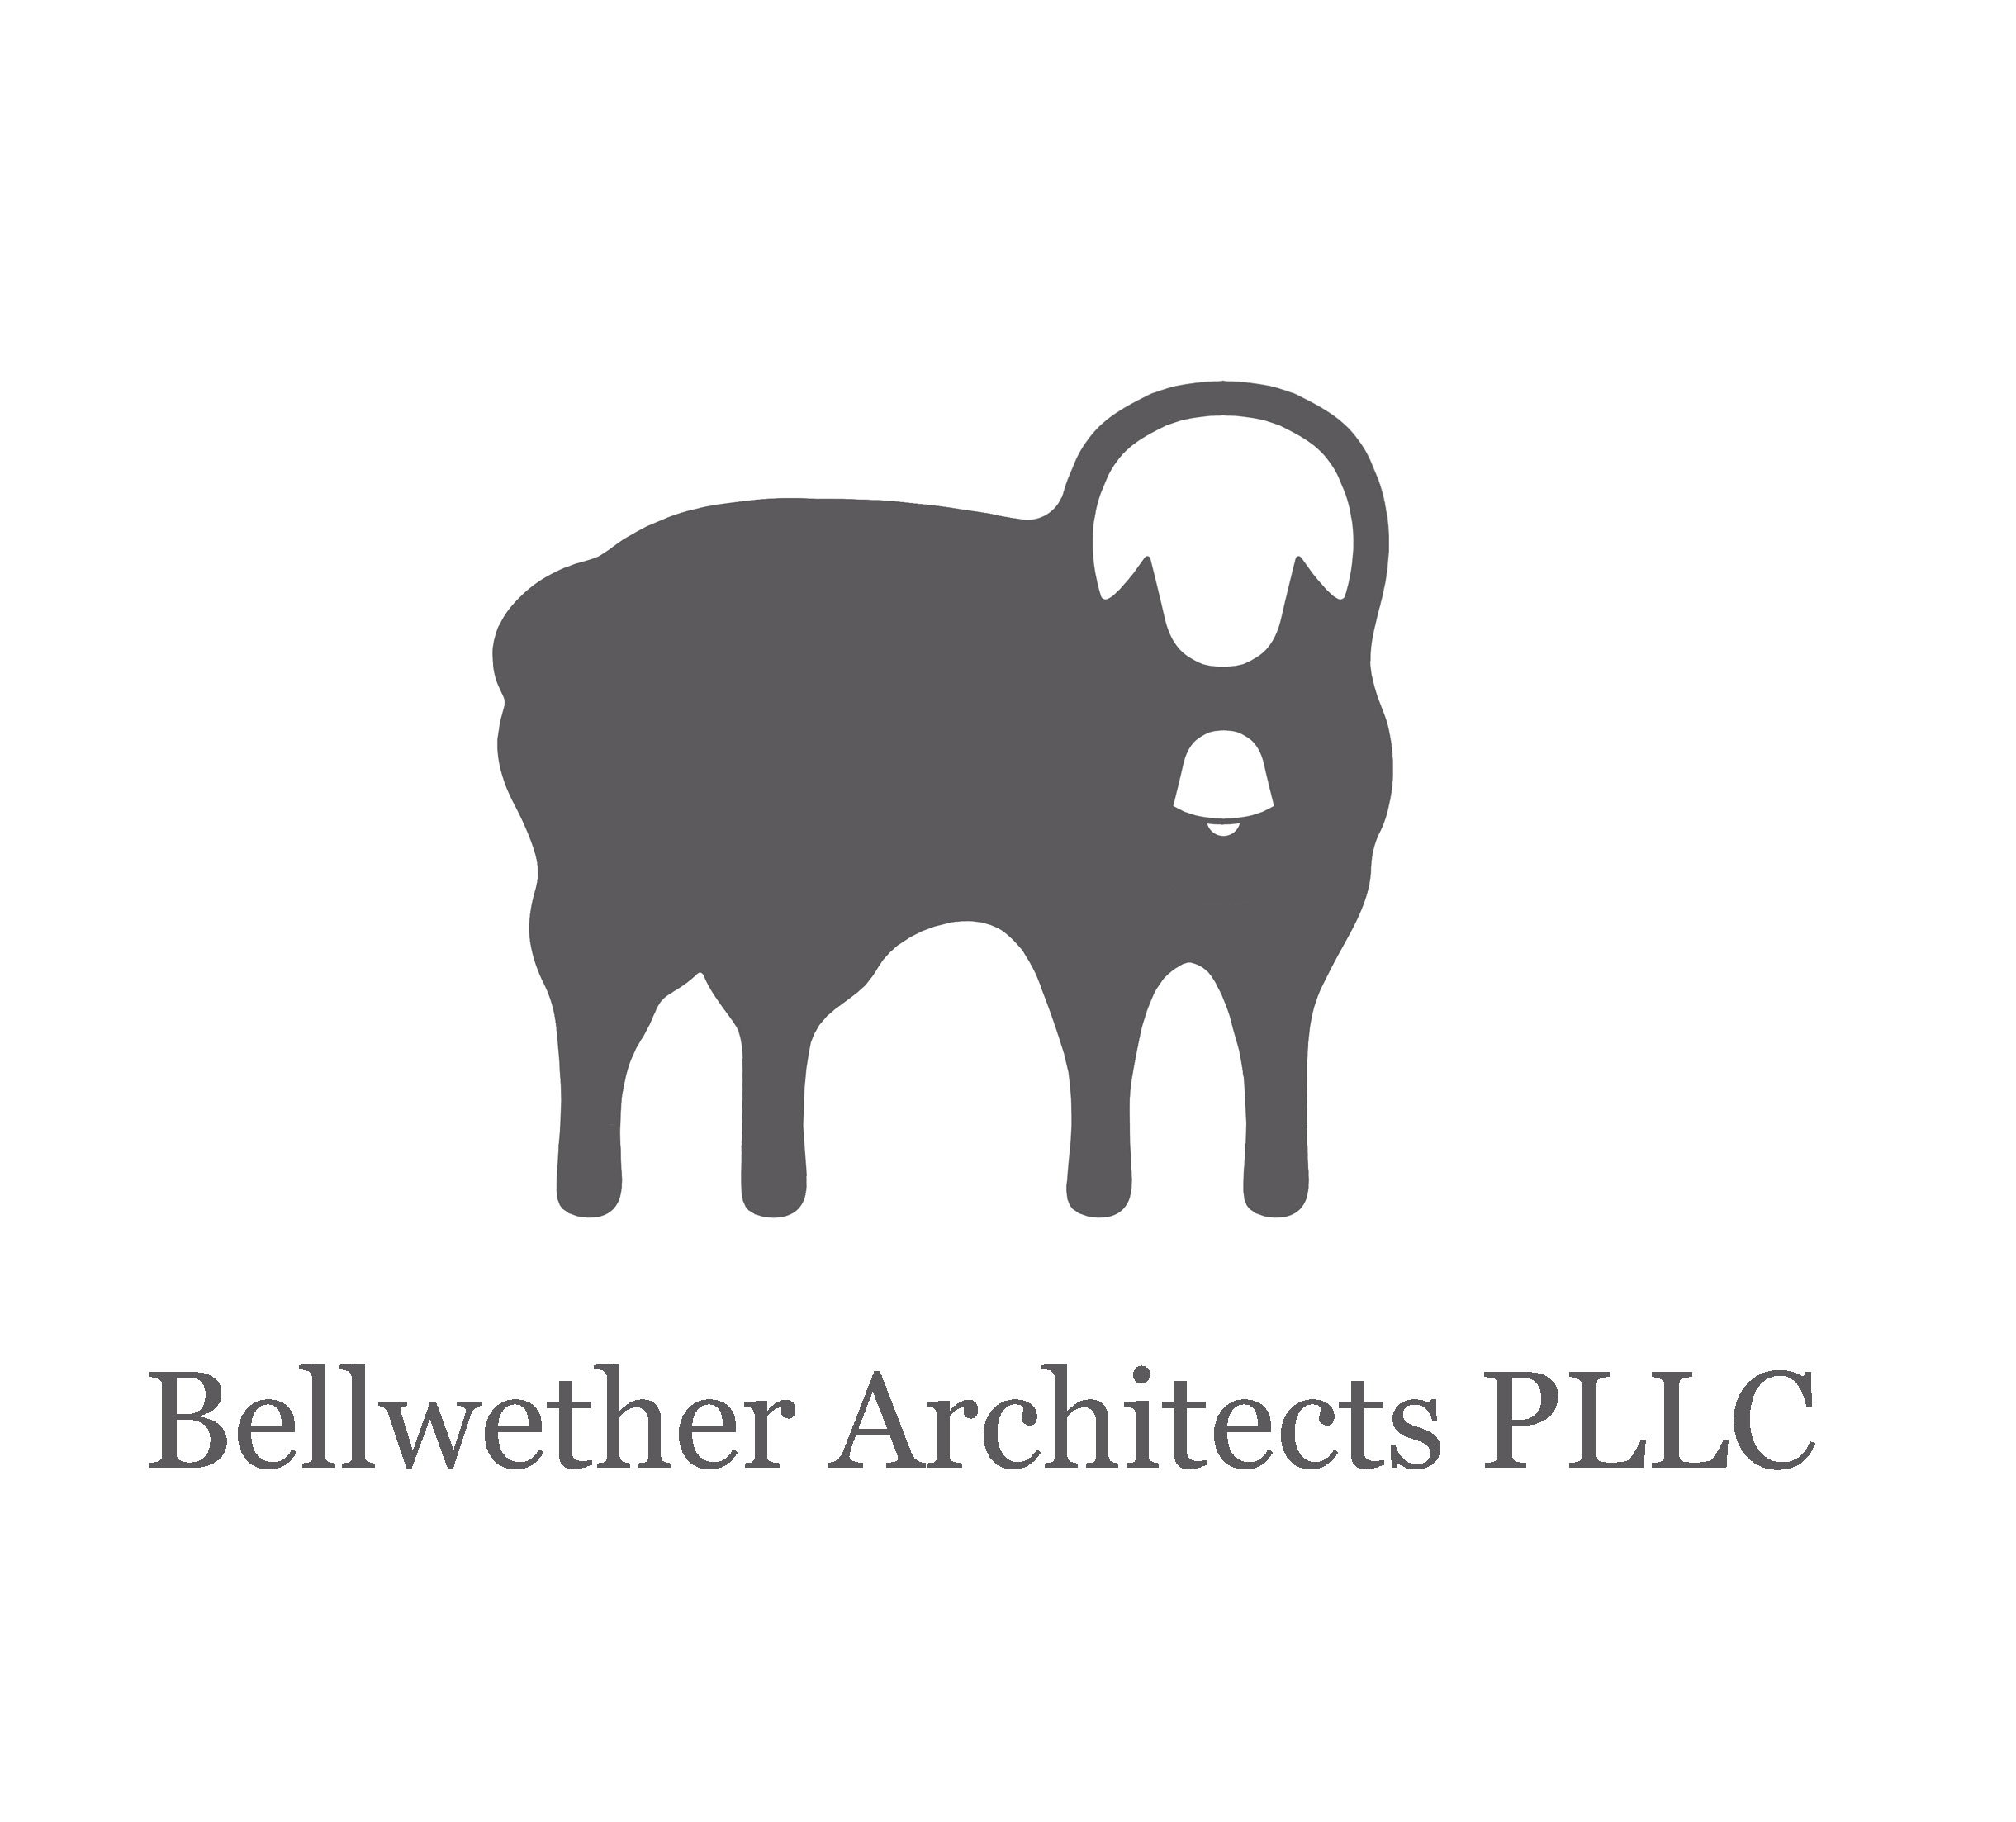 Bellwether Architects, PLLC